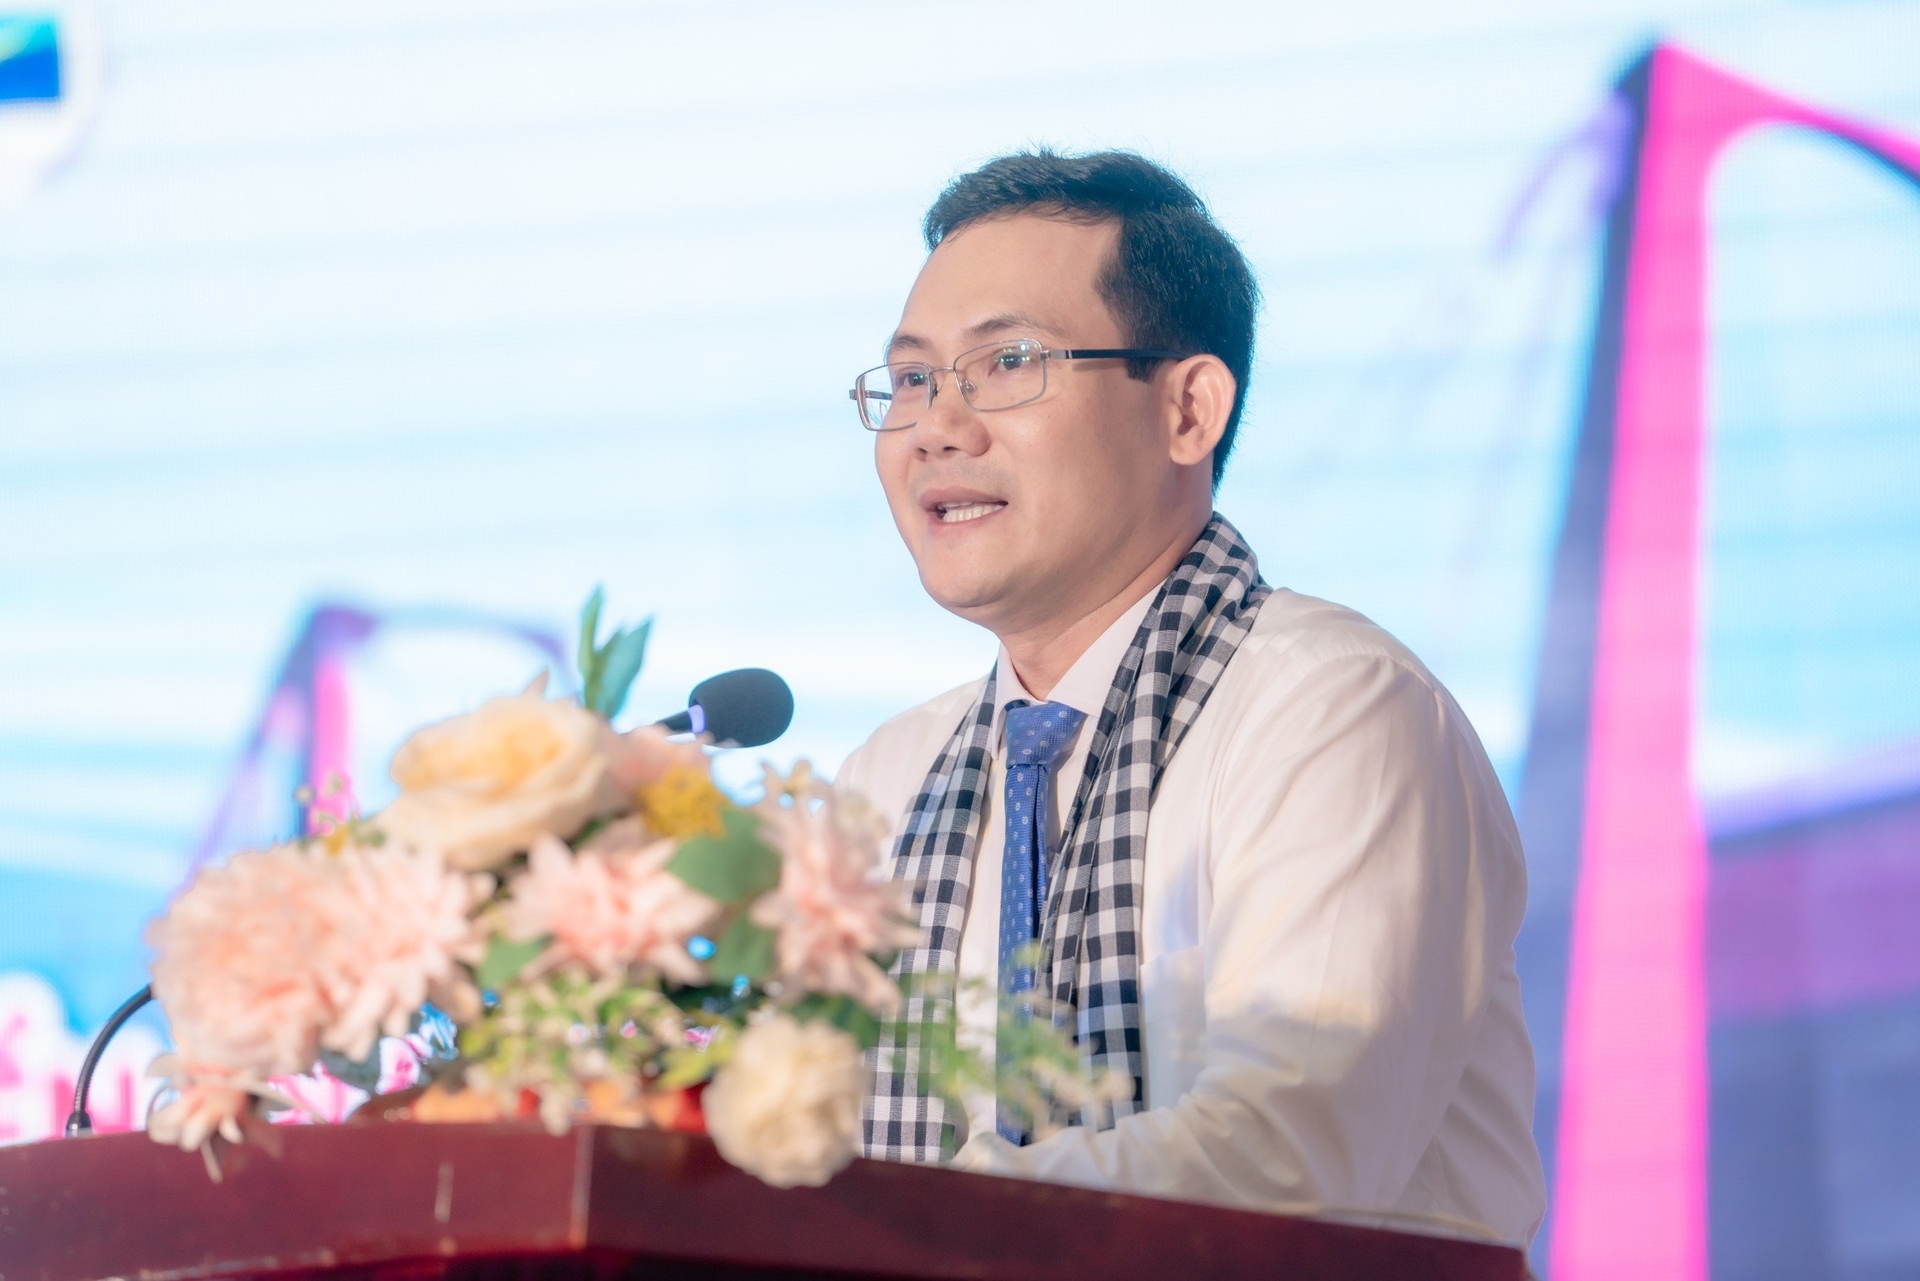 Mr. Nguyen Minh Tuan, Director of Can Tho city's Department of Culture, Sports, and Tourism, expects that local investors, service providers, and travel businesses will utilize the cooperation agreement to join forces and establish two-way tourism services. Photo: Kim Anh.